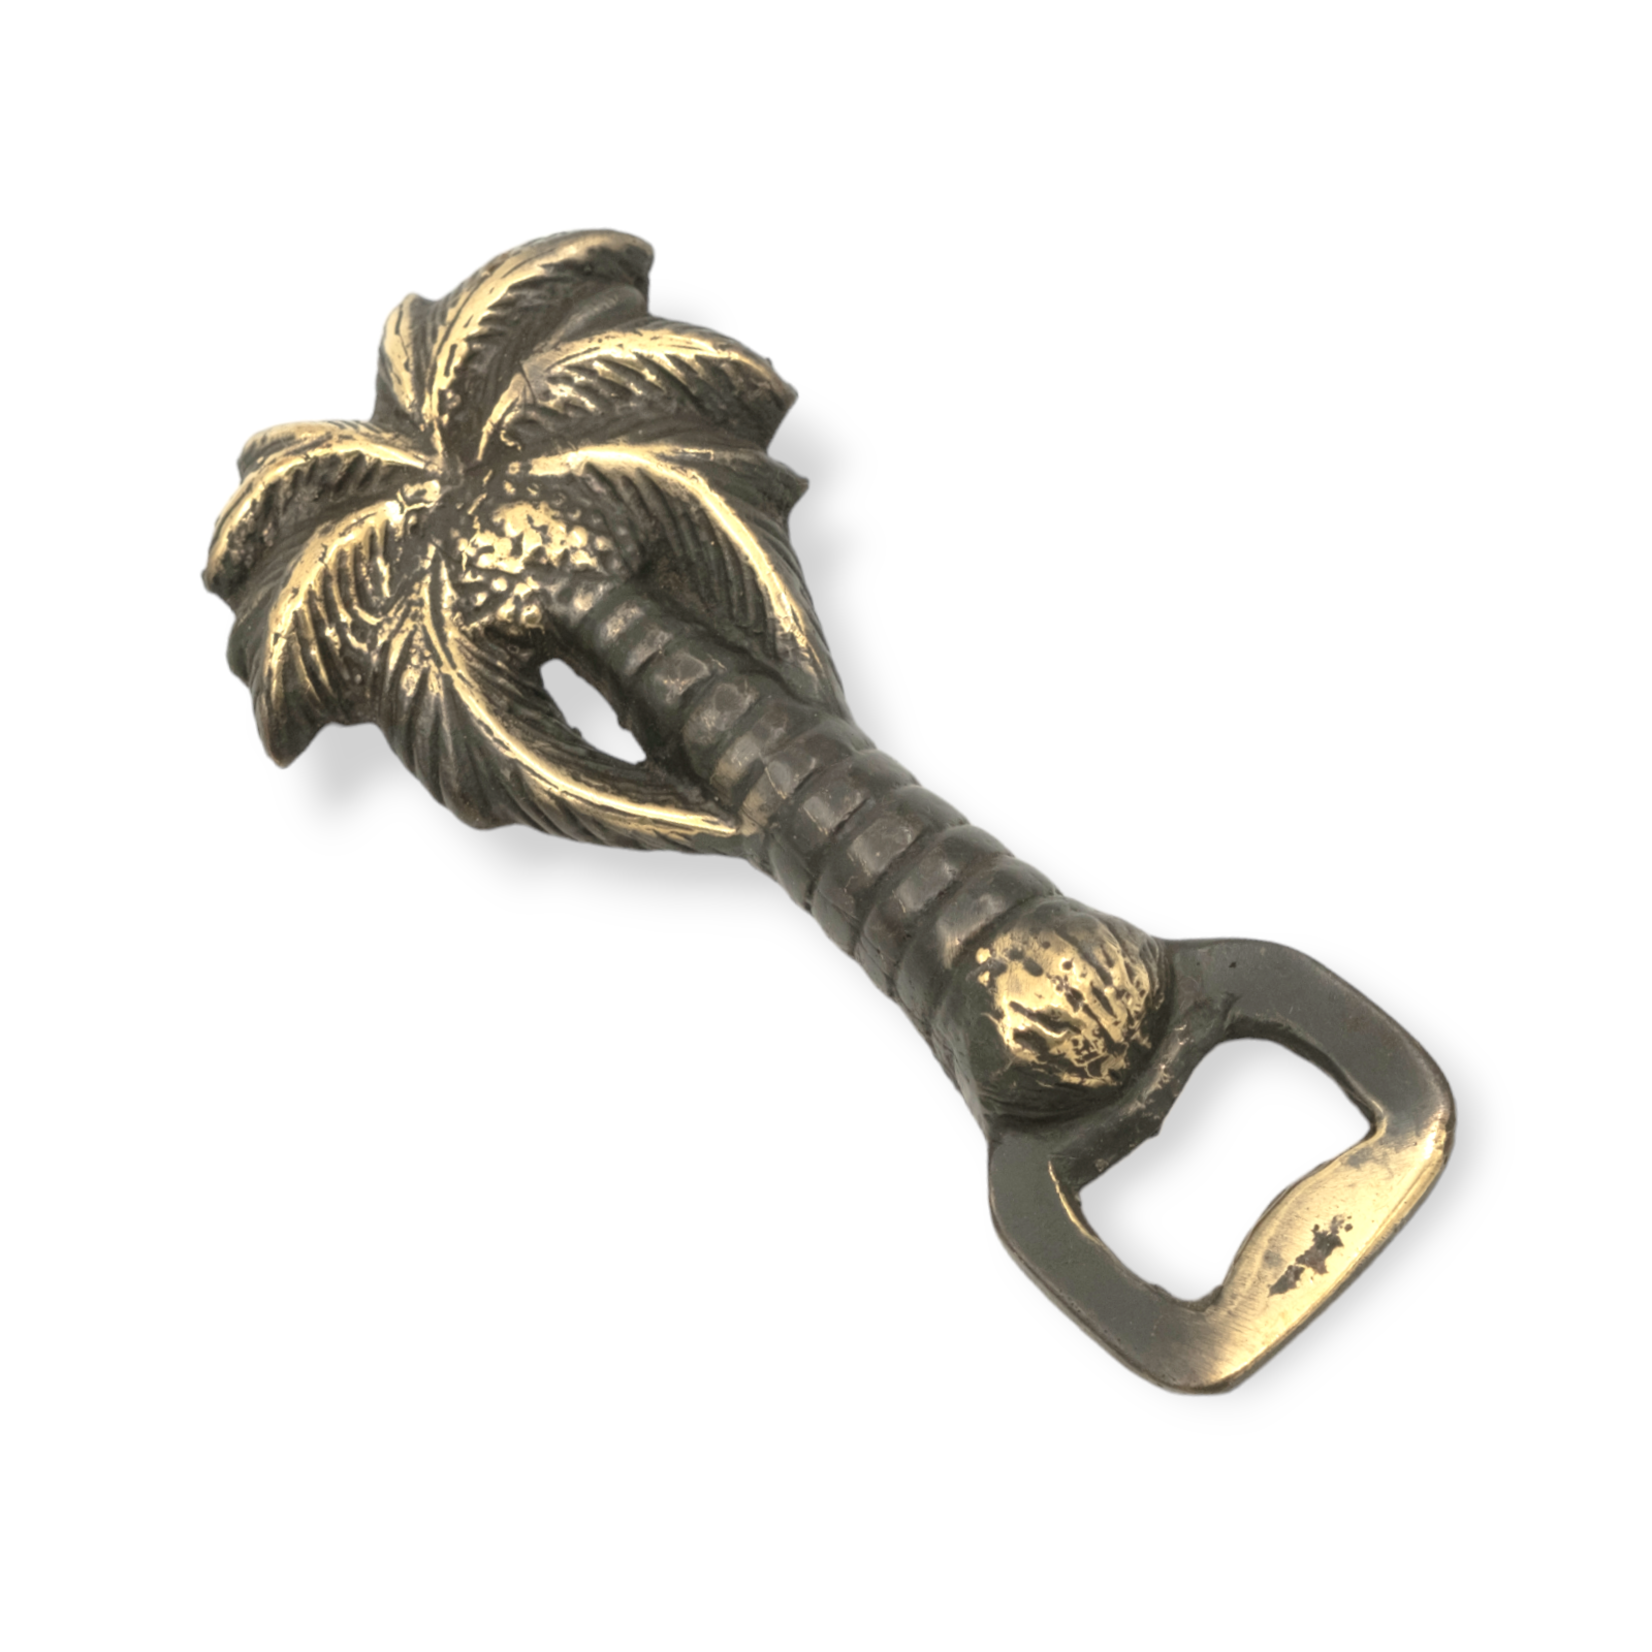 Hand Made Solid Brass Palm Opener Antiqued